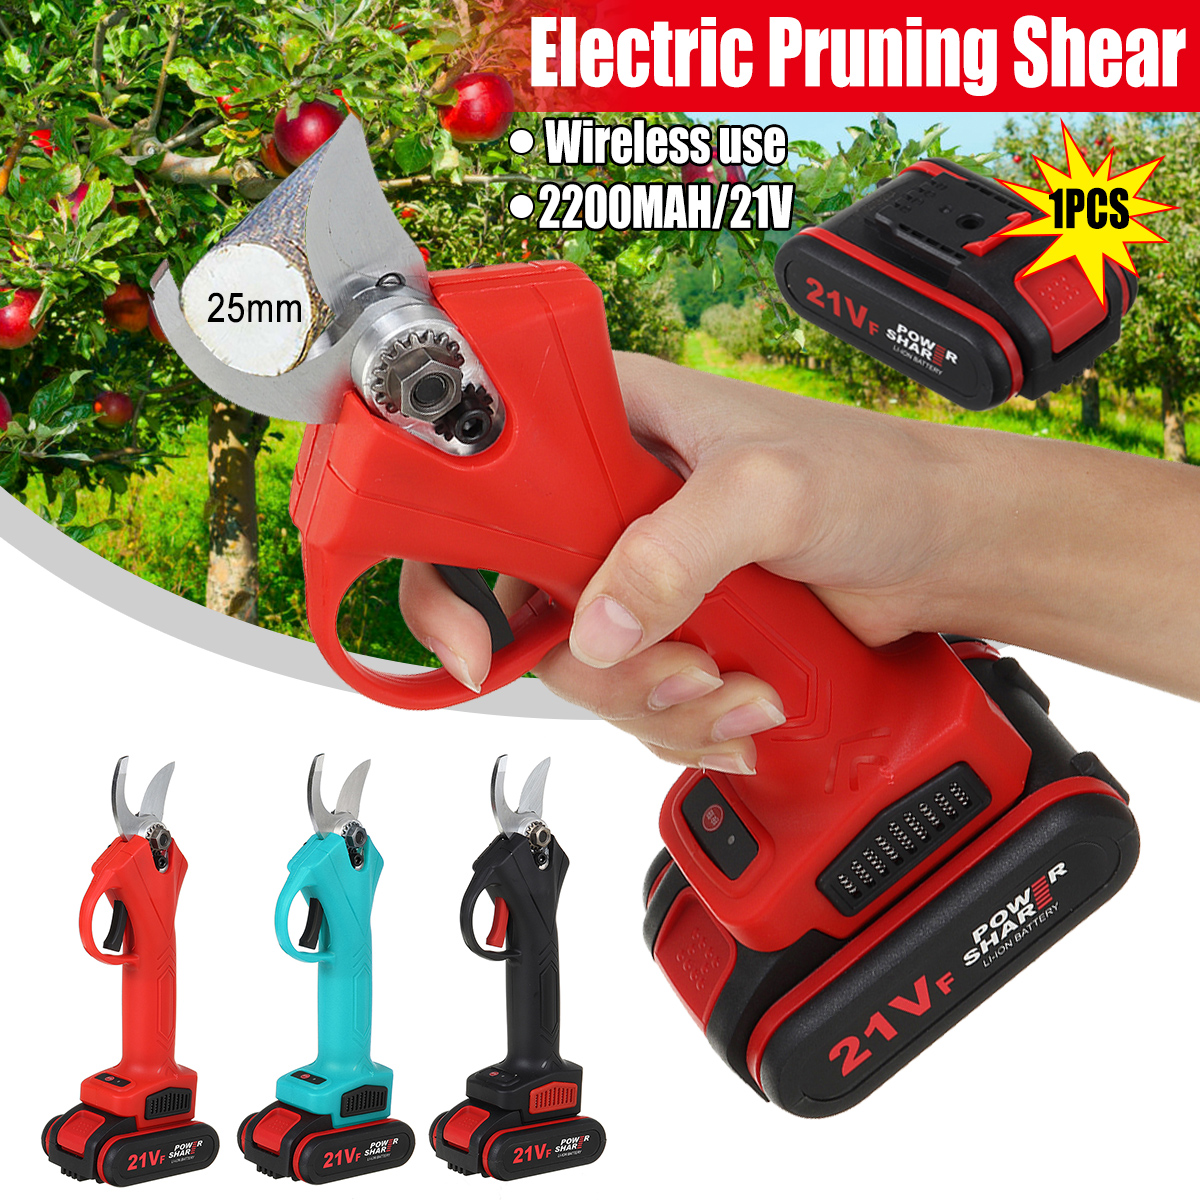 21V-Wireless-25mm-Rechargeable-Electric-Scissors-Branch-Pruning-Shear-Tree-Cutting-Tools-W-1-Battery-1749245-1